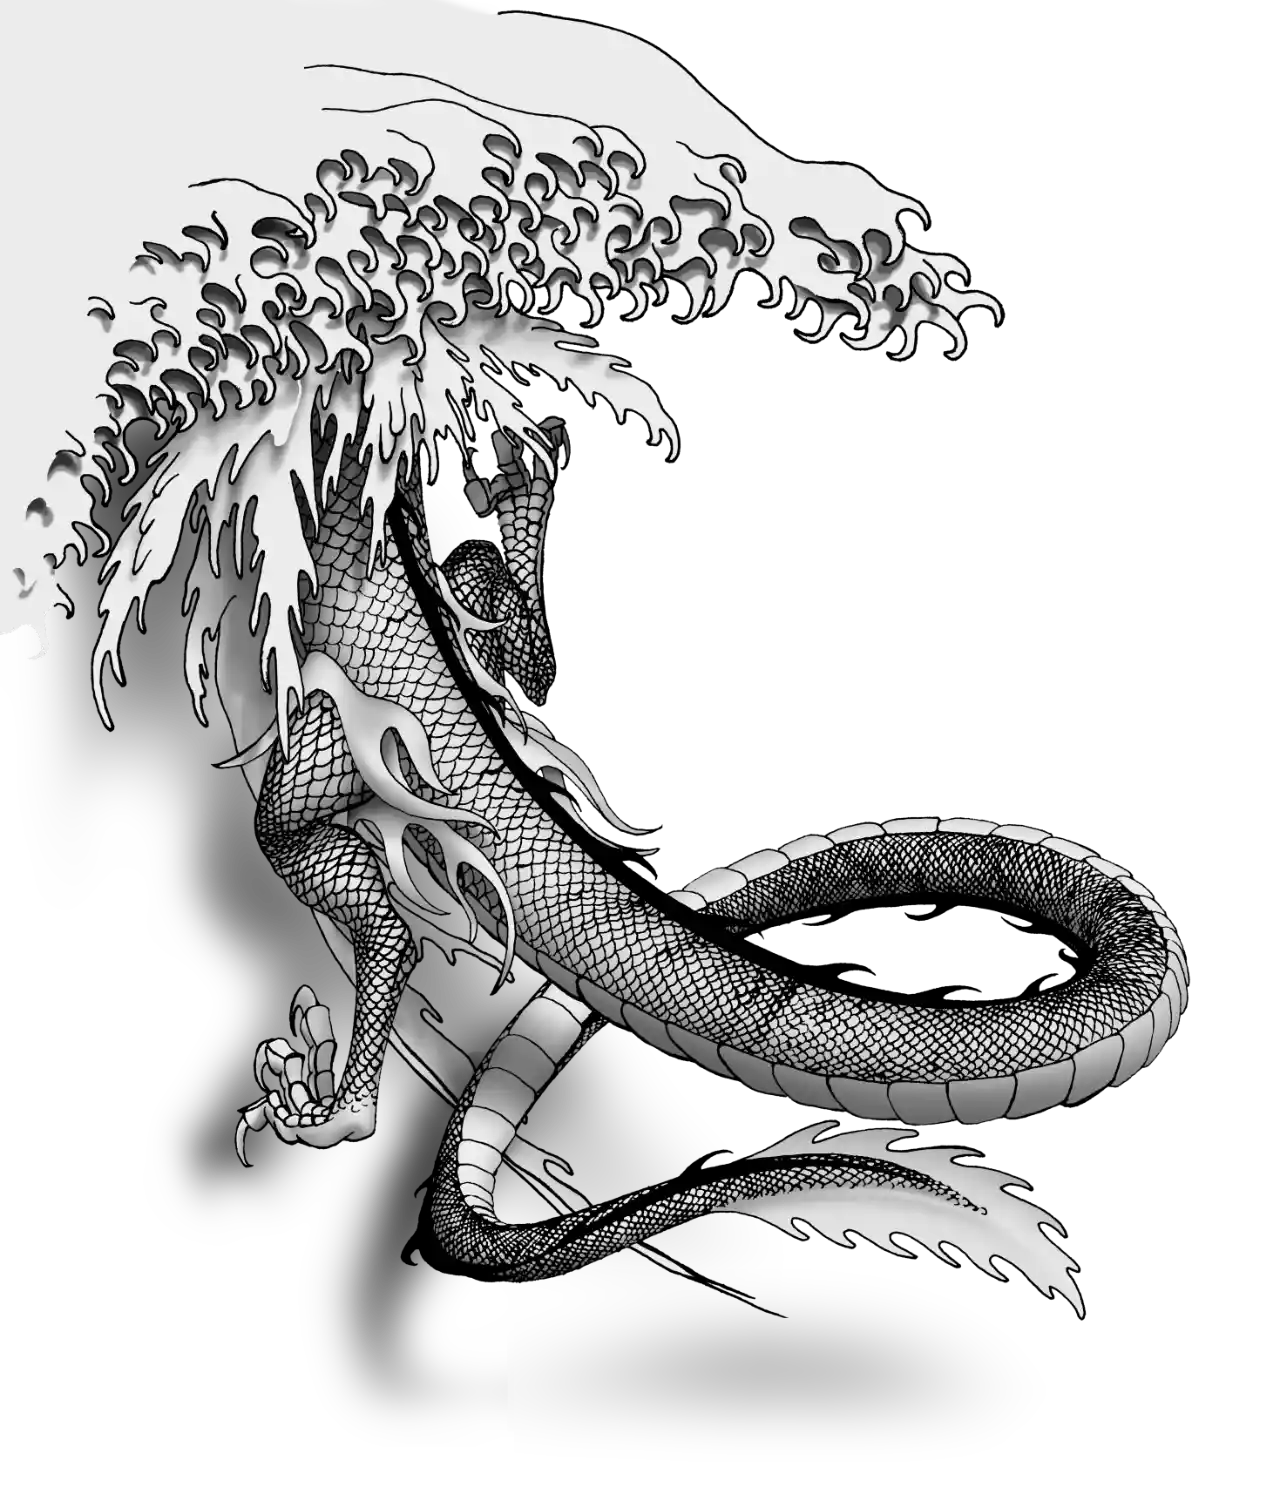 Illustration of the back end of a dragon.